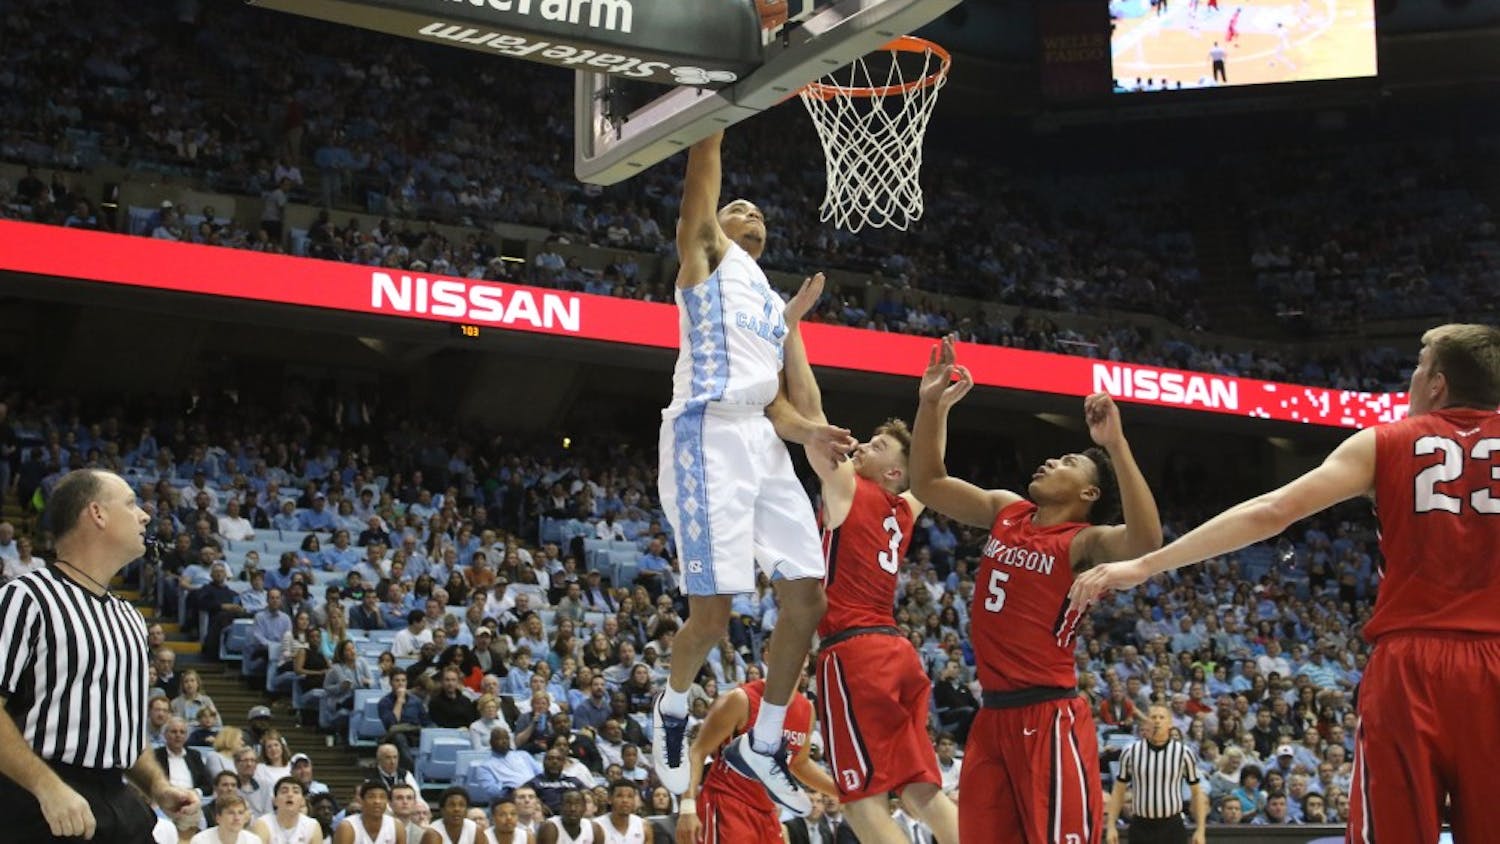 Forward Brice Johnson (11) lays the ball in during UNC's 98-65 route of Davidson.